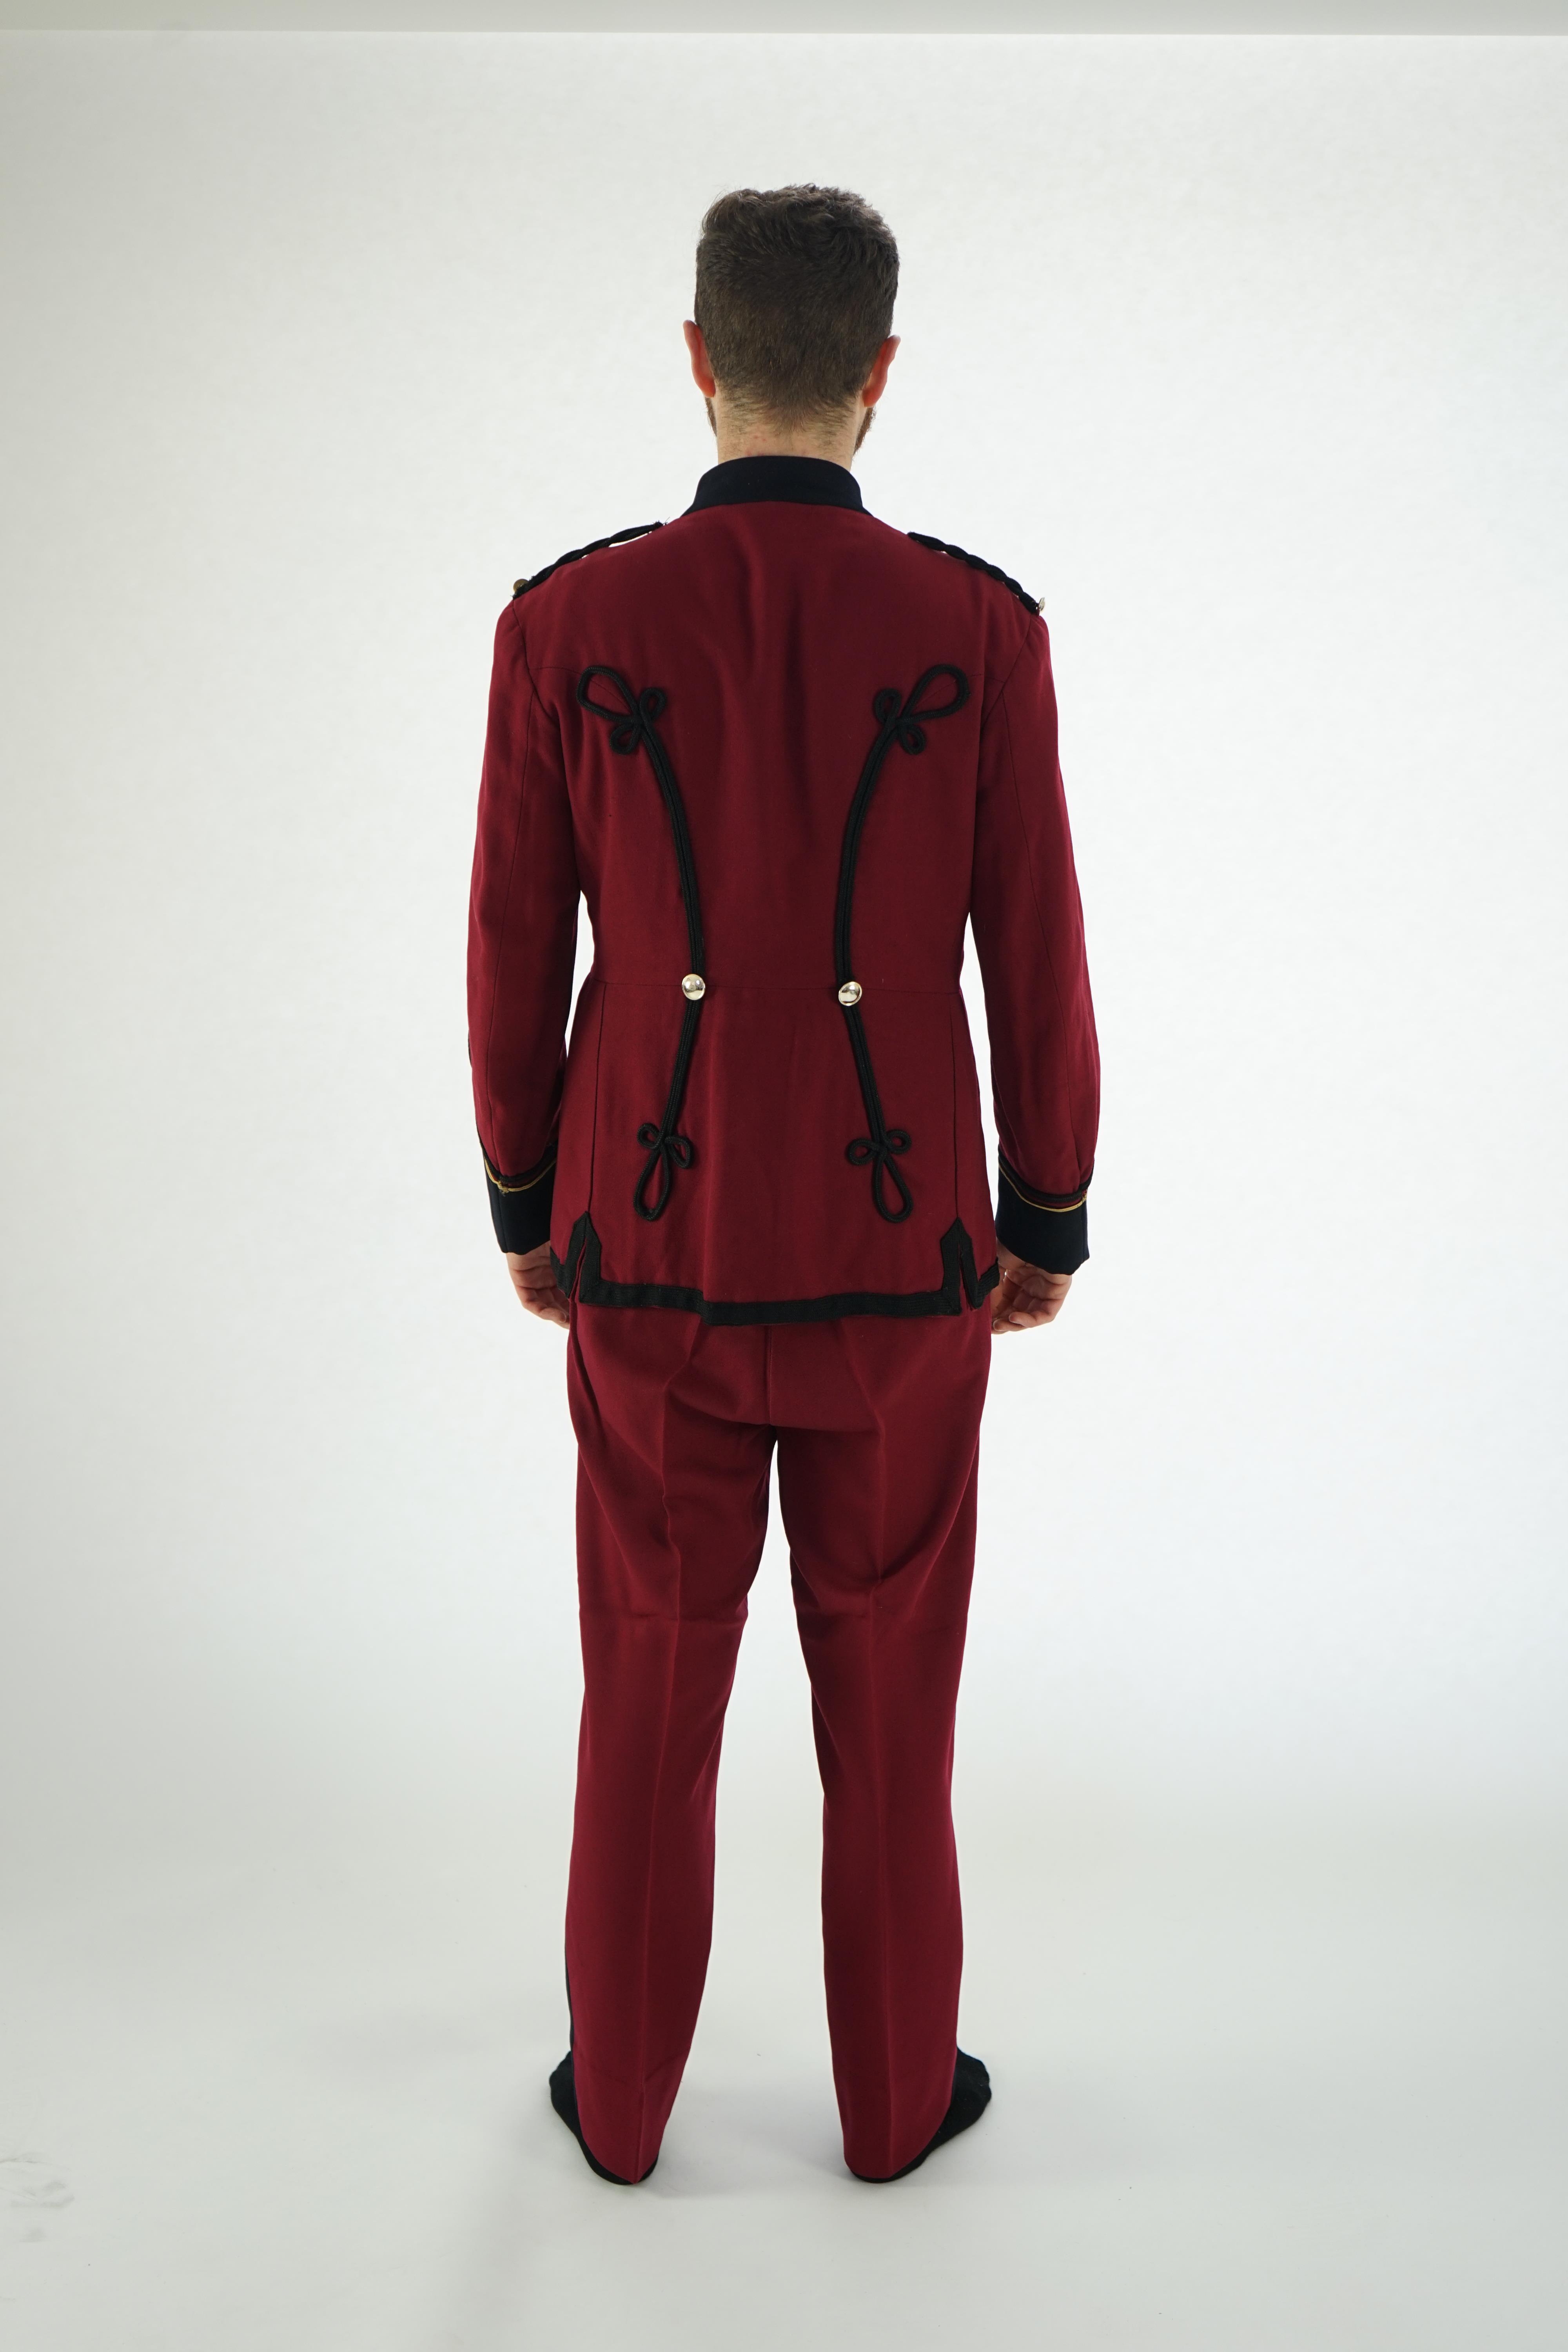 An early 20th century burgundy and black trim Military/Bandsman's uniform jacket and trousers.